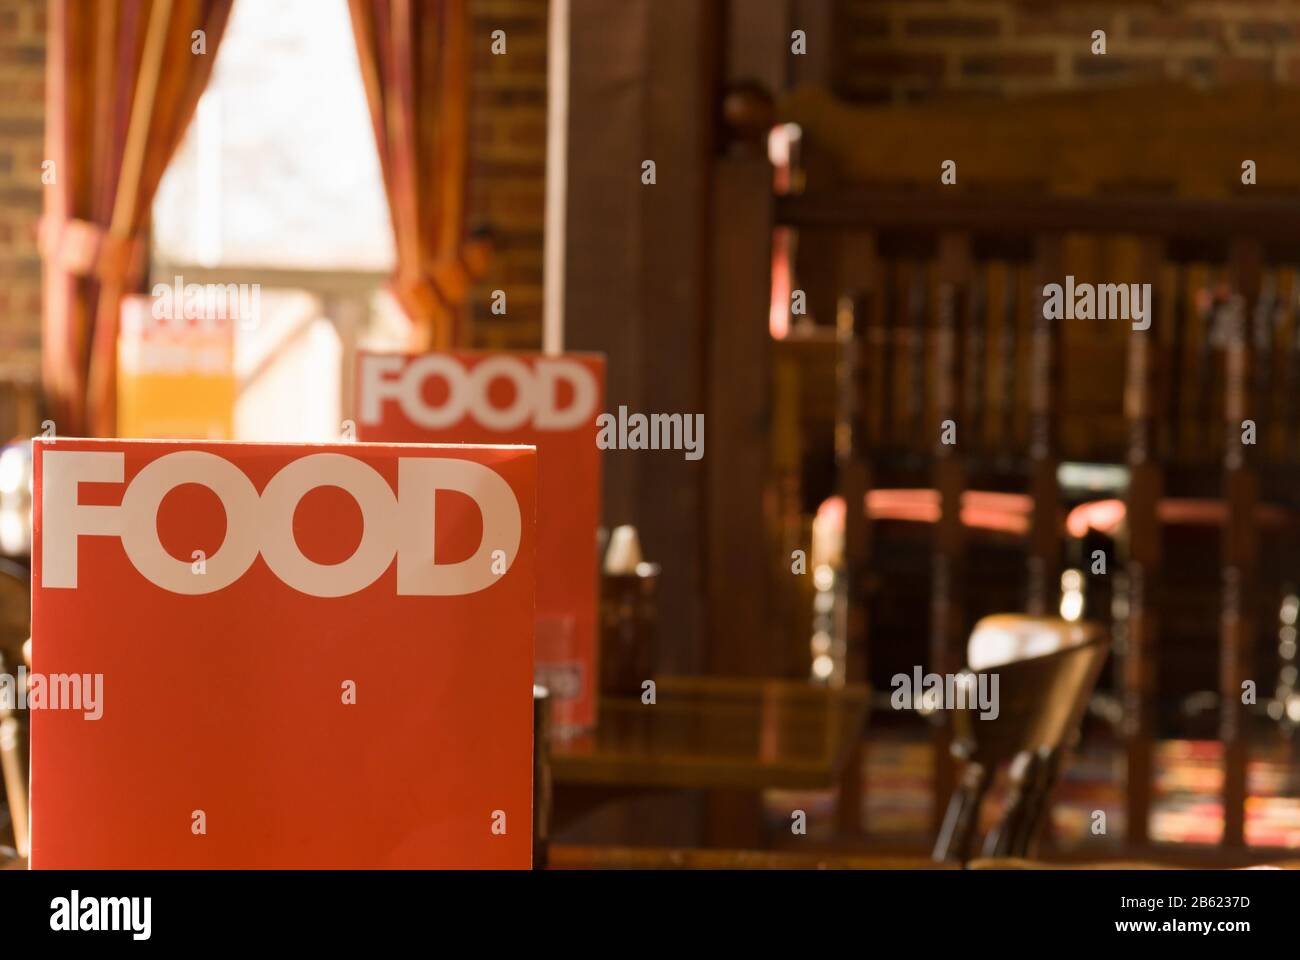 Menus with the word Food printed on them in an empty pub style restaurant in the UK Stock Photo